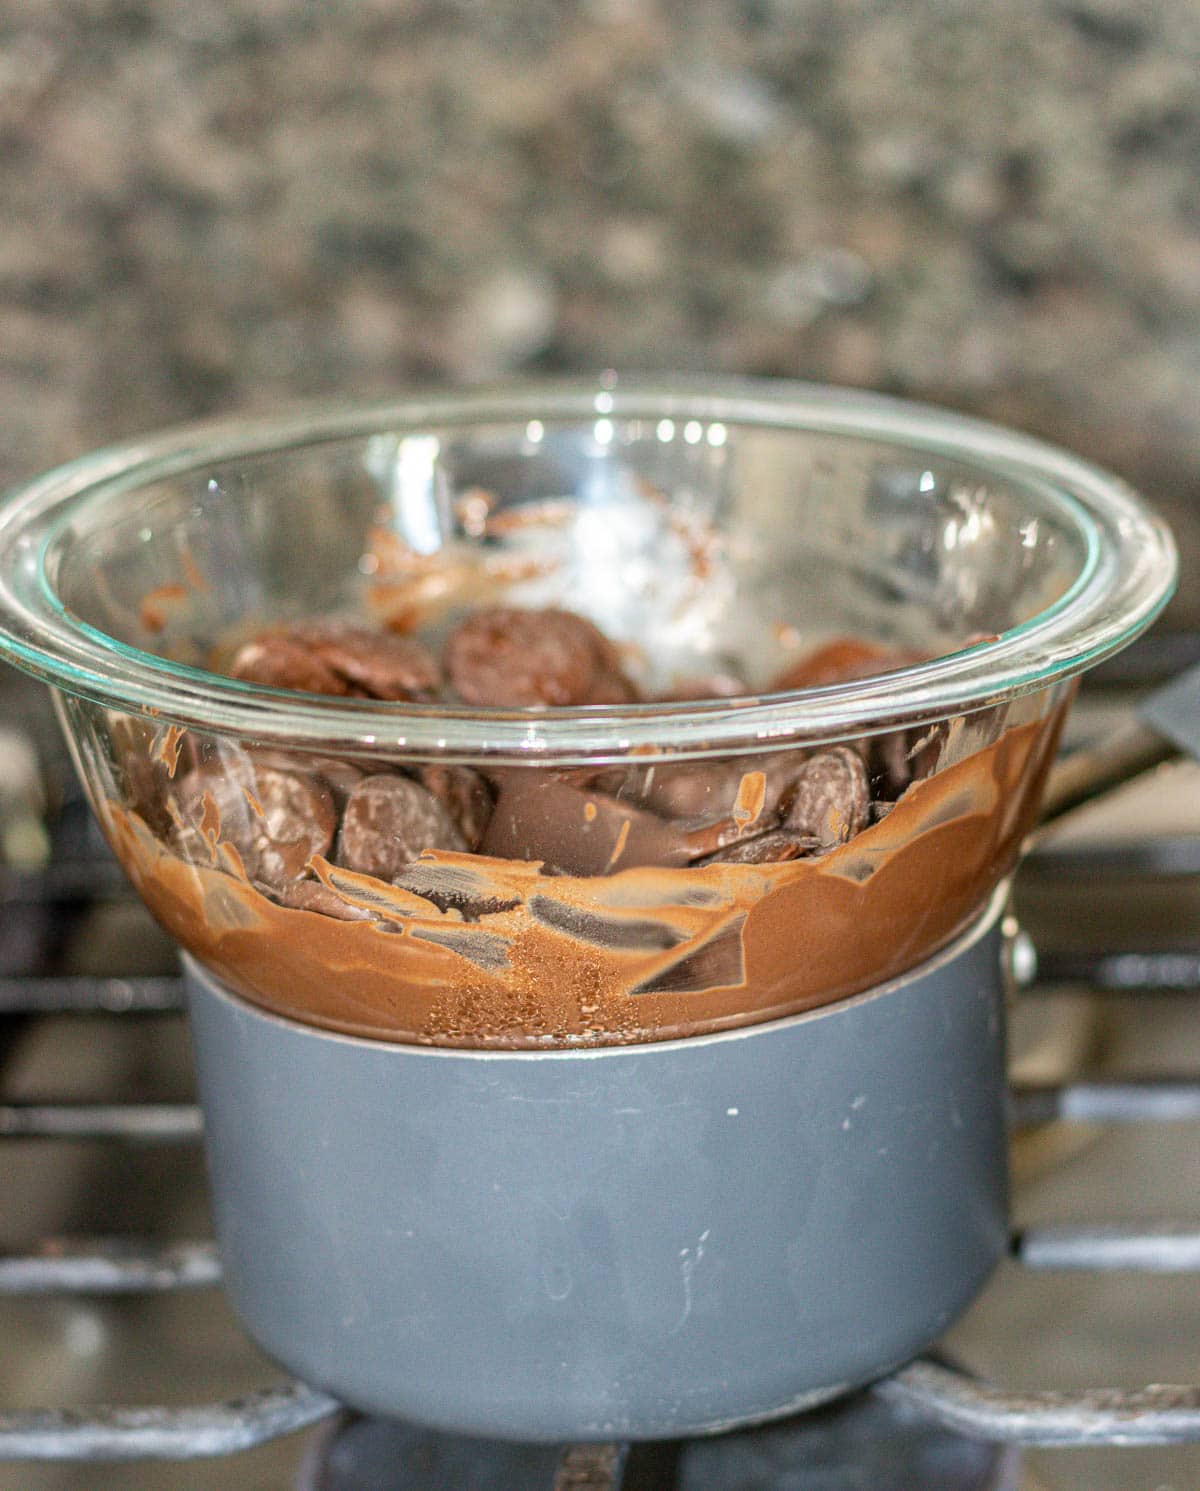 Double boiler: Mixing bowl with chocolate on pot